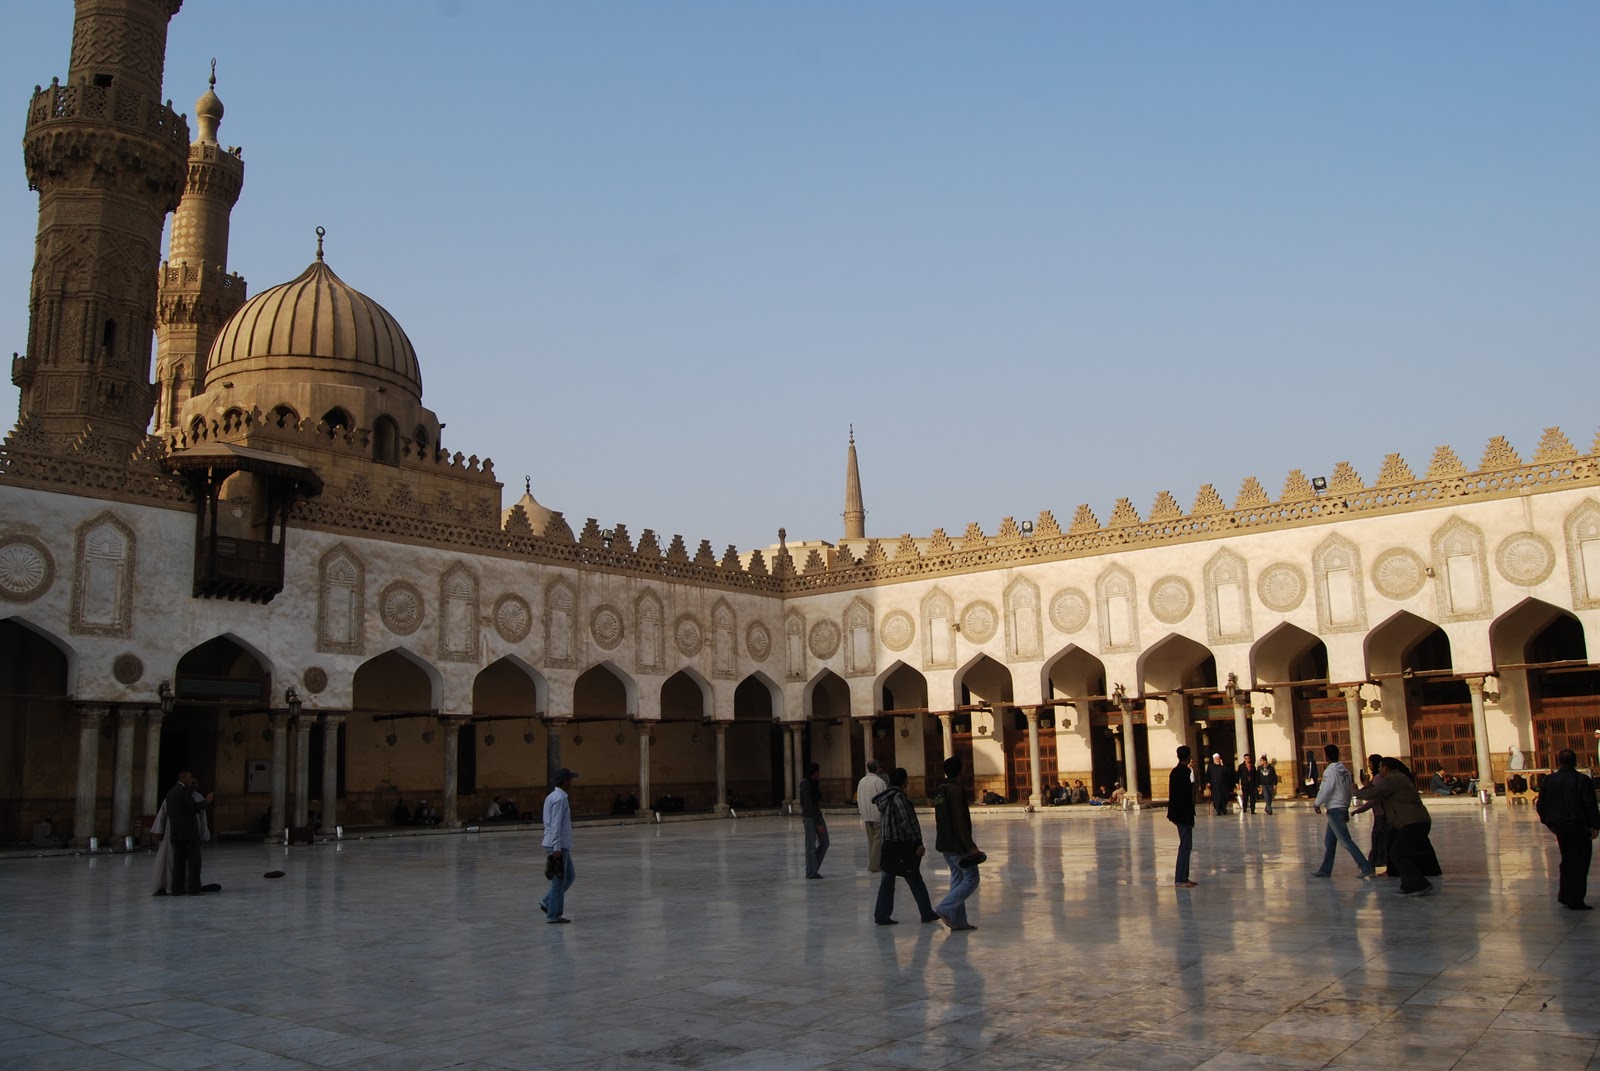 87963Day-tour-to-the-Islamic-mosques-in-Cairo.jpg